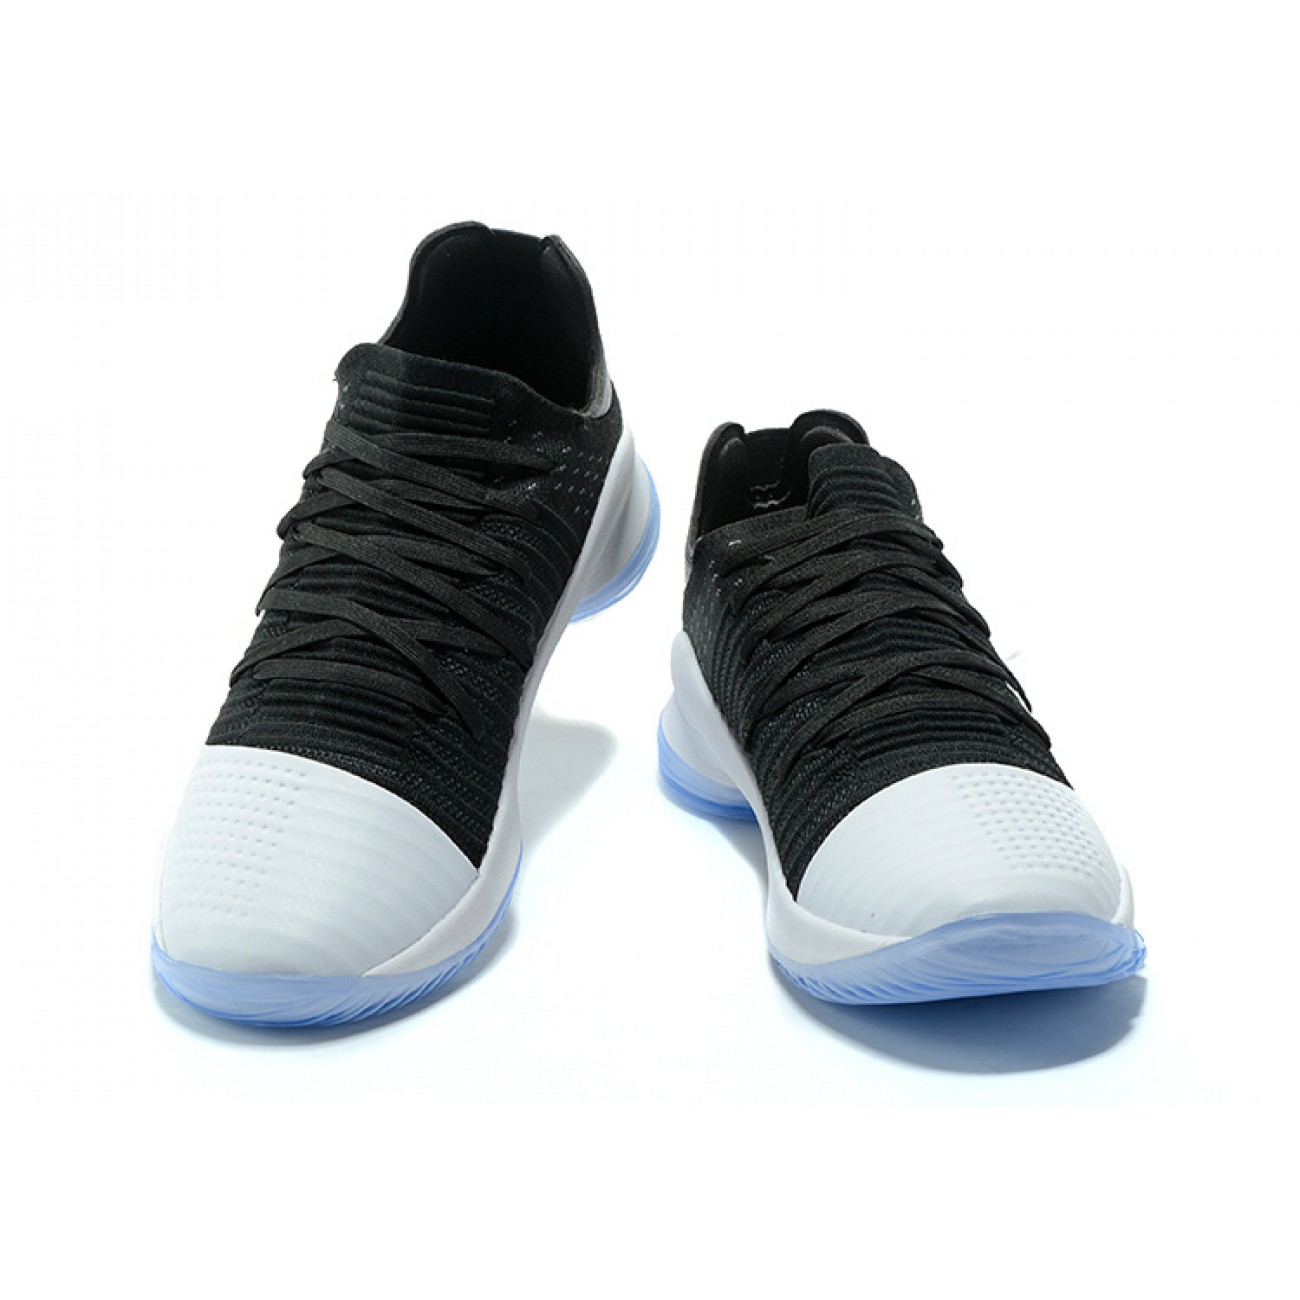 Under Armour UA Curry 4 Low White/Black